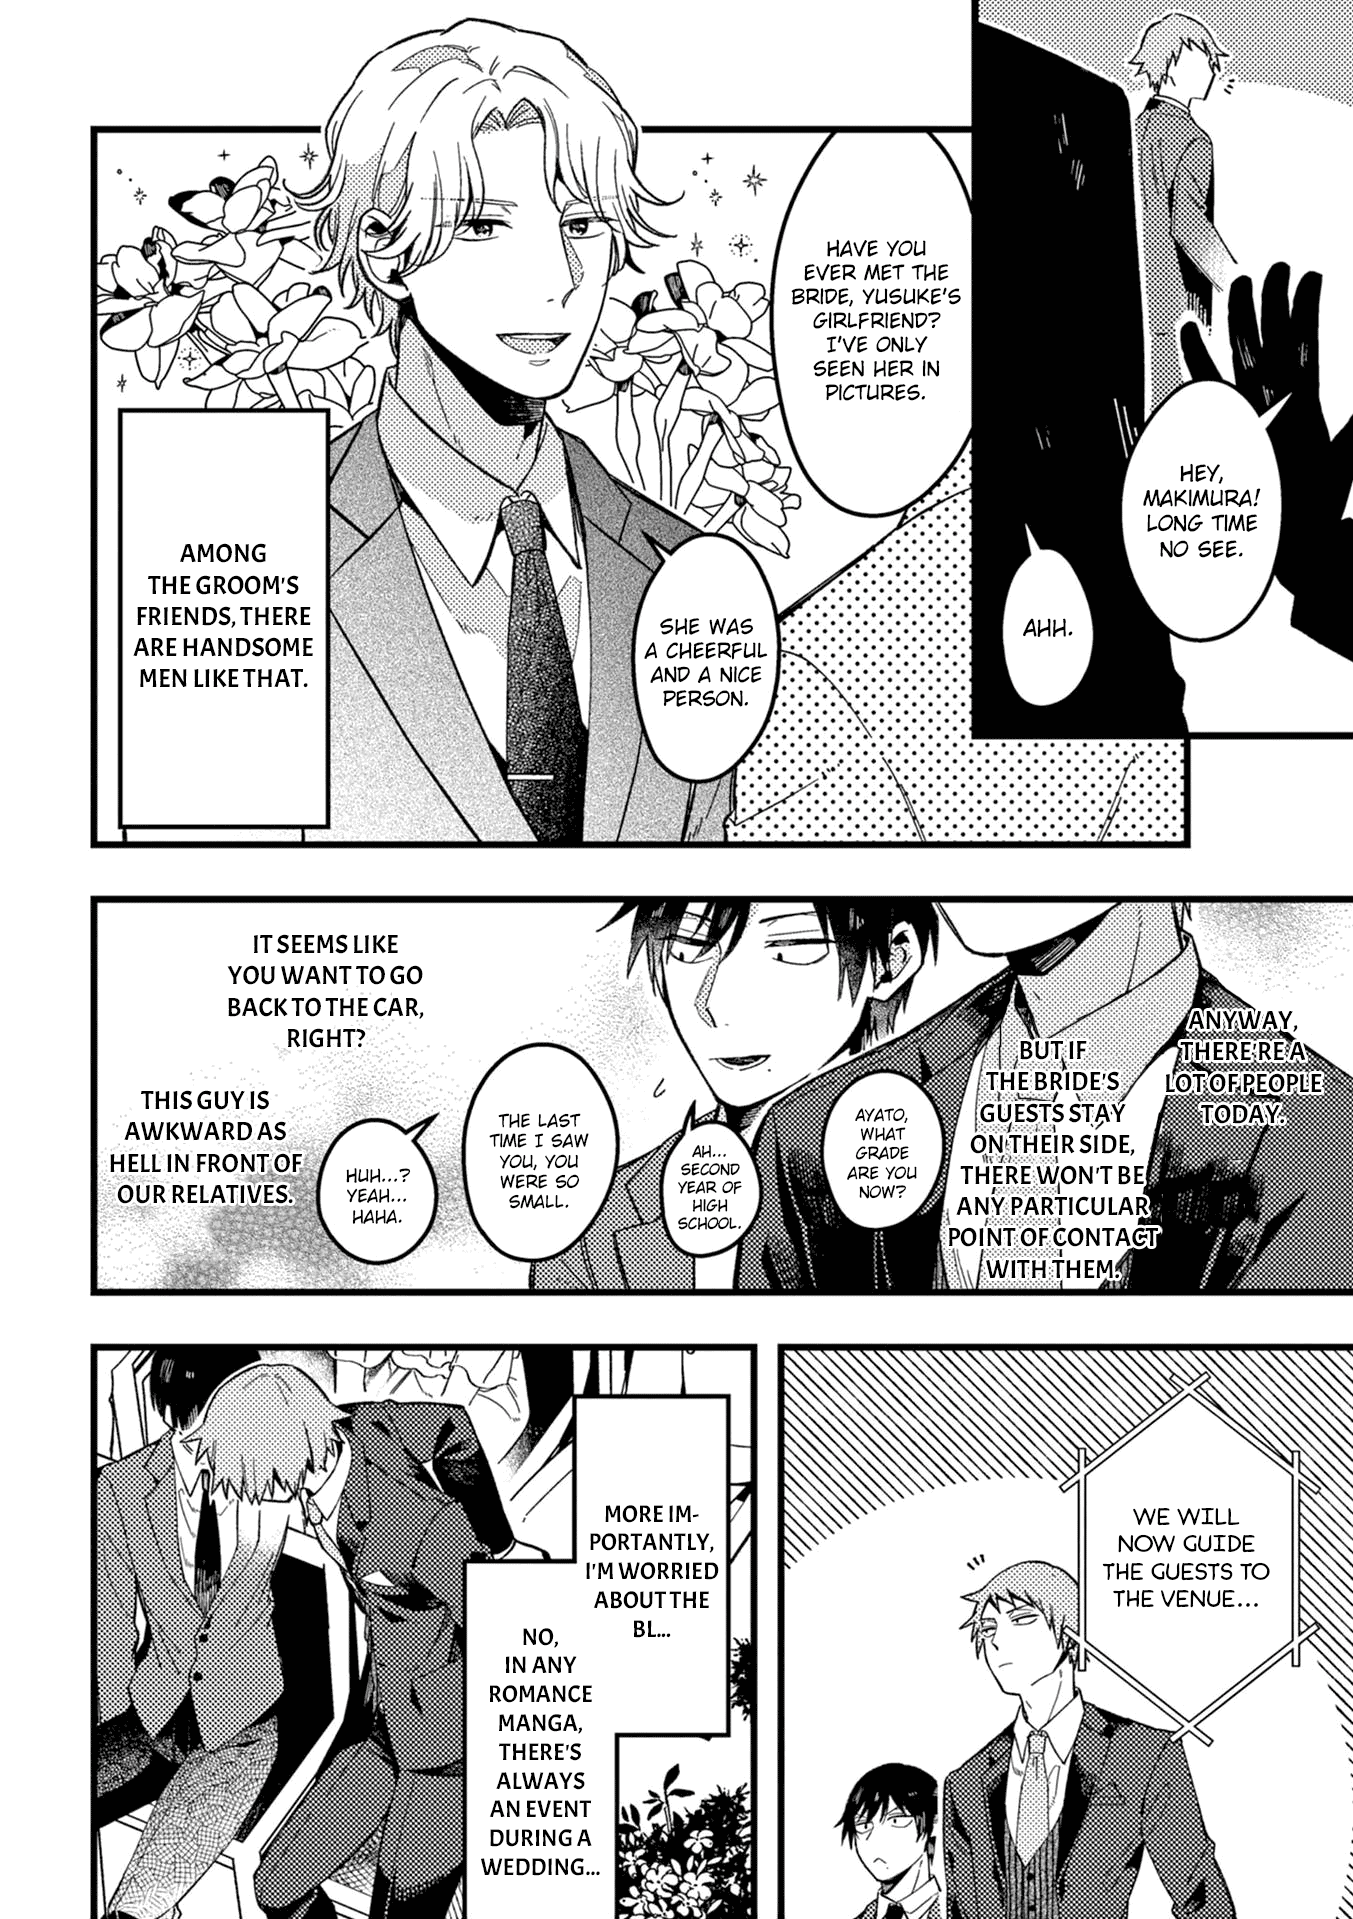 A World Where Everything Definitely Becomes Bl Vs. The Man Who Definitely Doesn't Want To Be In A Bl Vol.2 Chapter 33: Vs Wedding - Picture 3